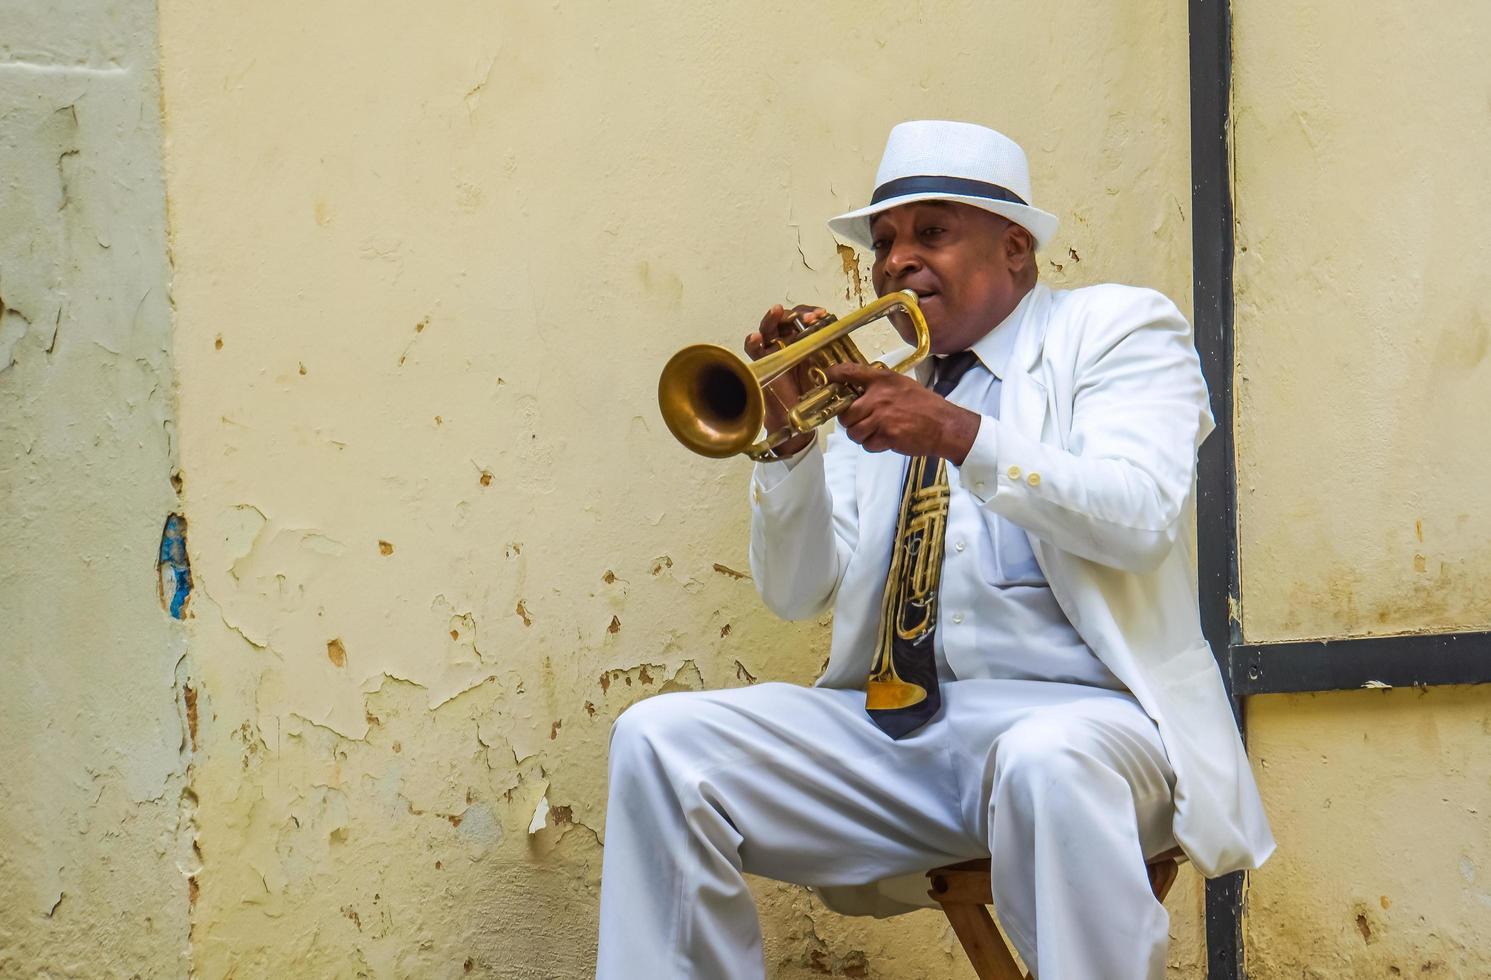 HAVANA, CUBA, JULY 4, 2017 - Unidentified man playing trumpet on the street of Havana, Cuba. Street musicians are common in Havana where they play music for tourists. photo